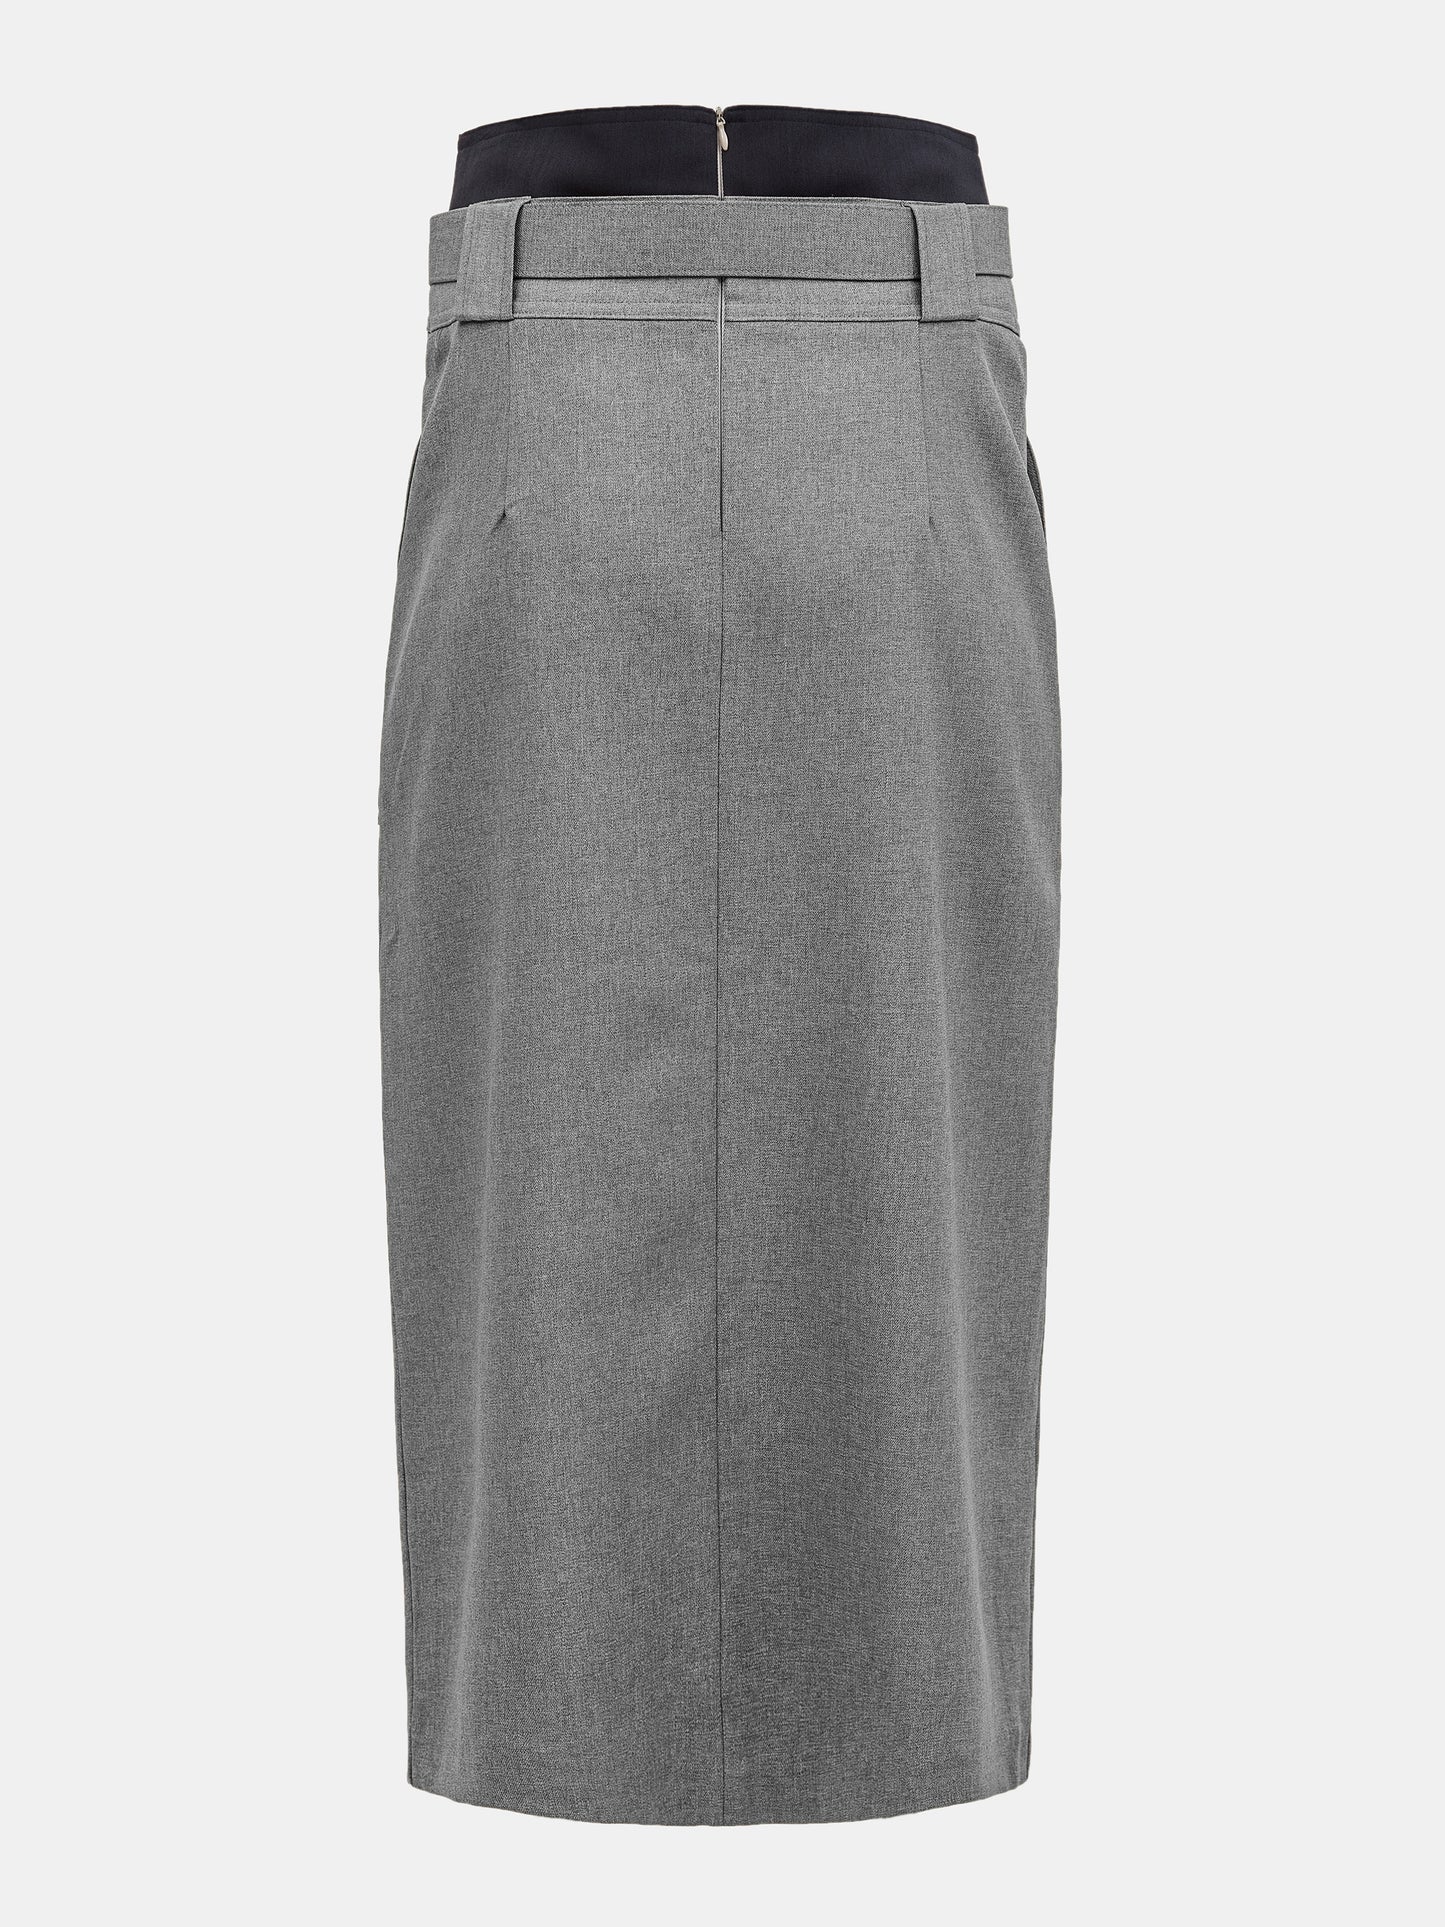 Belted Panel Suit Skirt, Grey